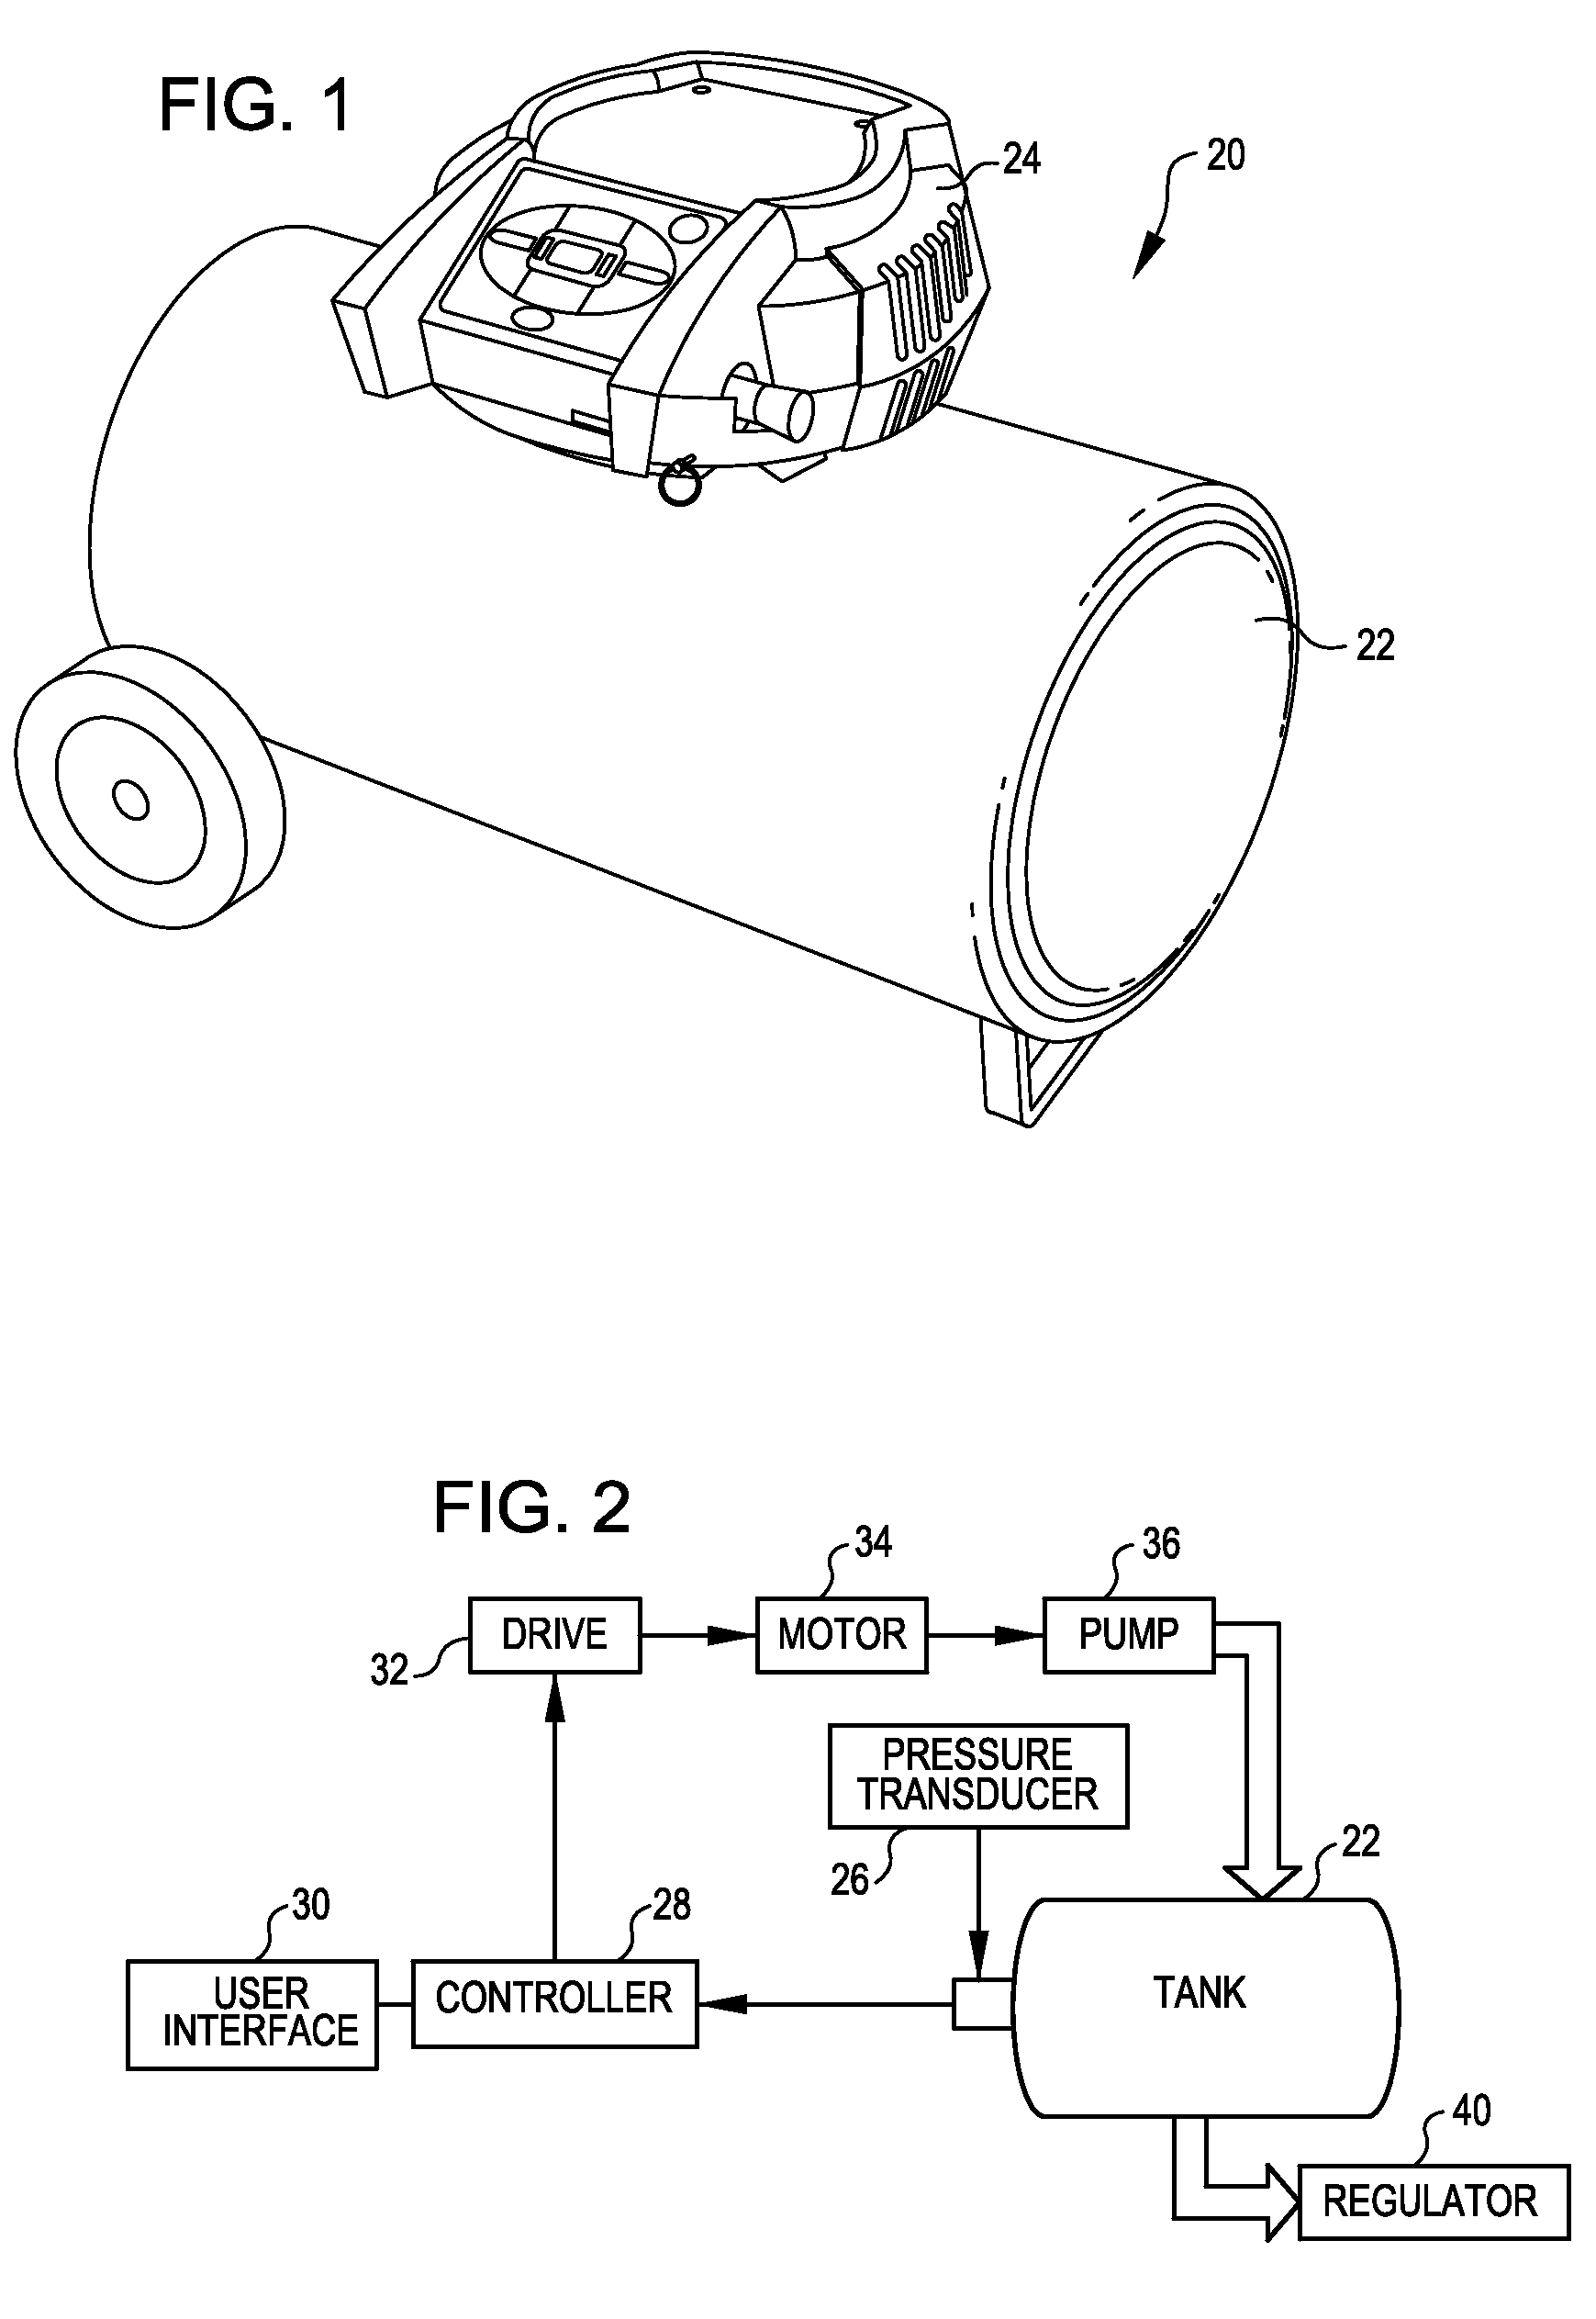 Air compressor having a pneumatic controller for controlling output air pressure